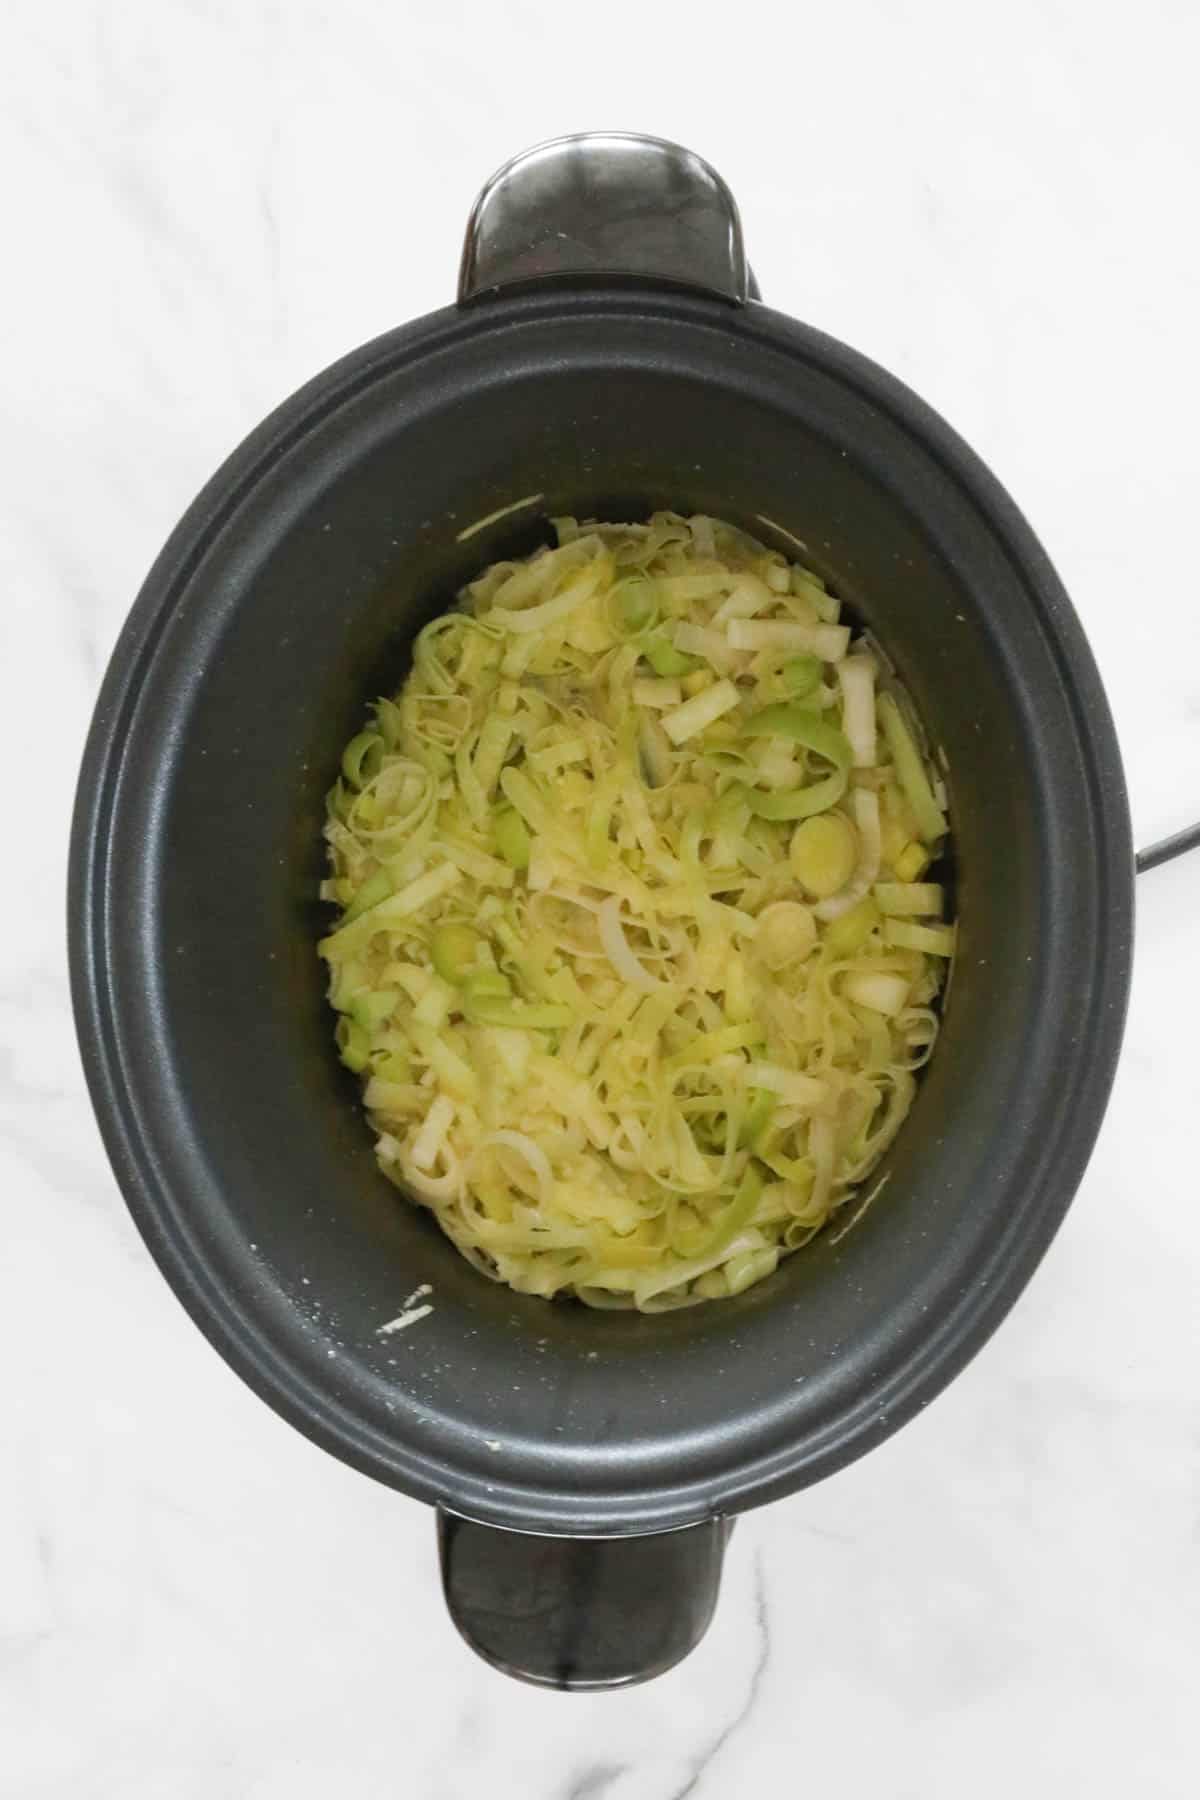 Leeks and garlic sauteing in a slow cooker.